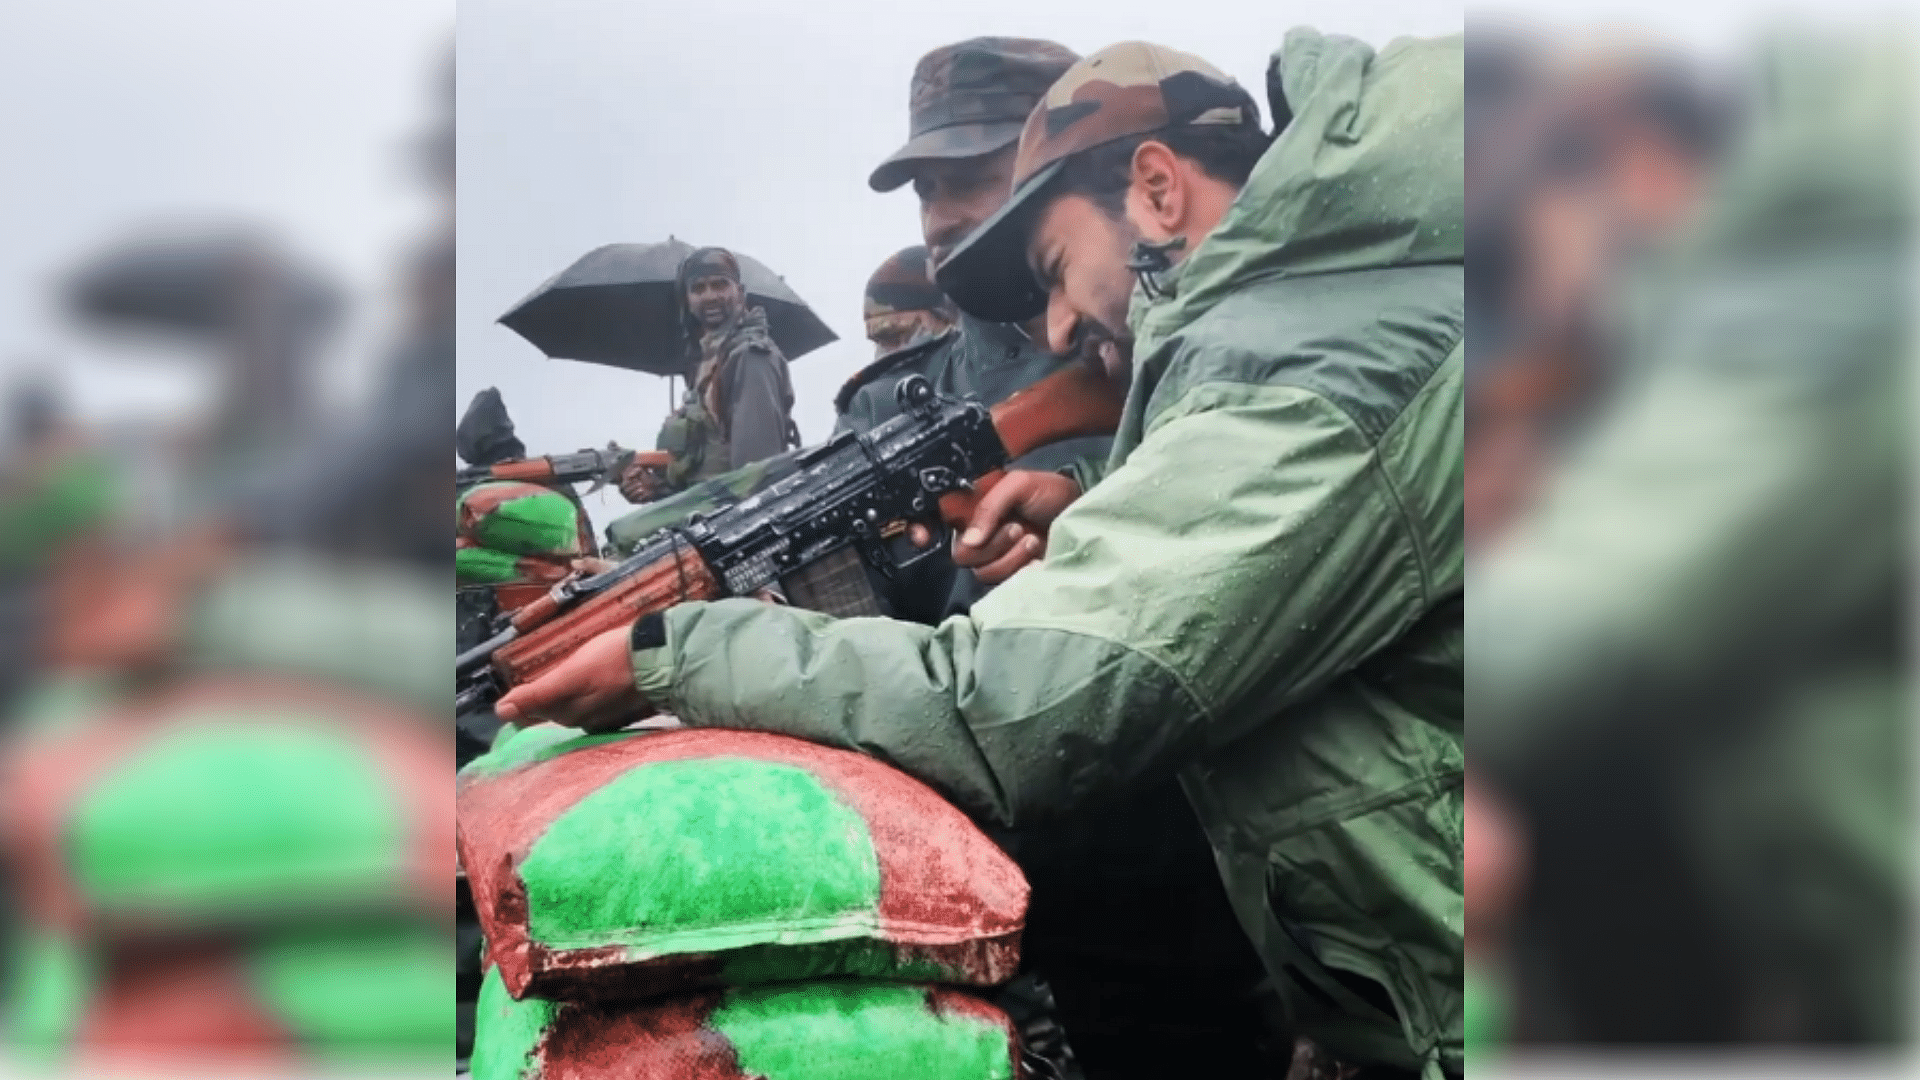 A soldier teaches Vicky Kaushal how to shoot a rifle.